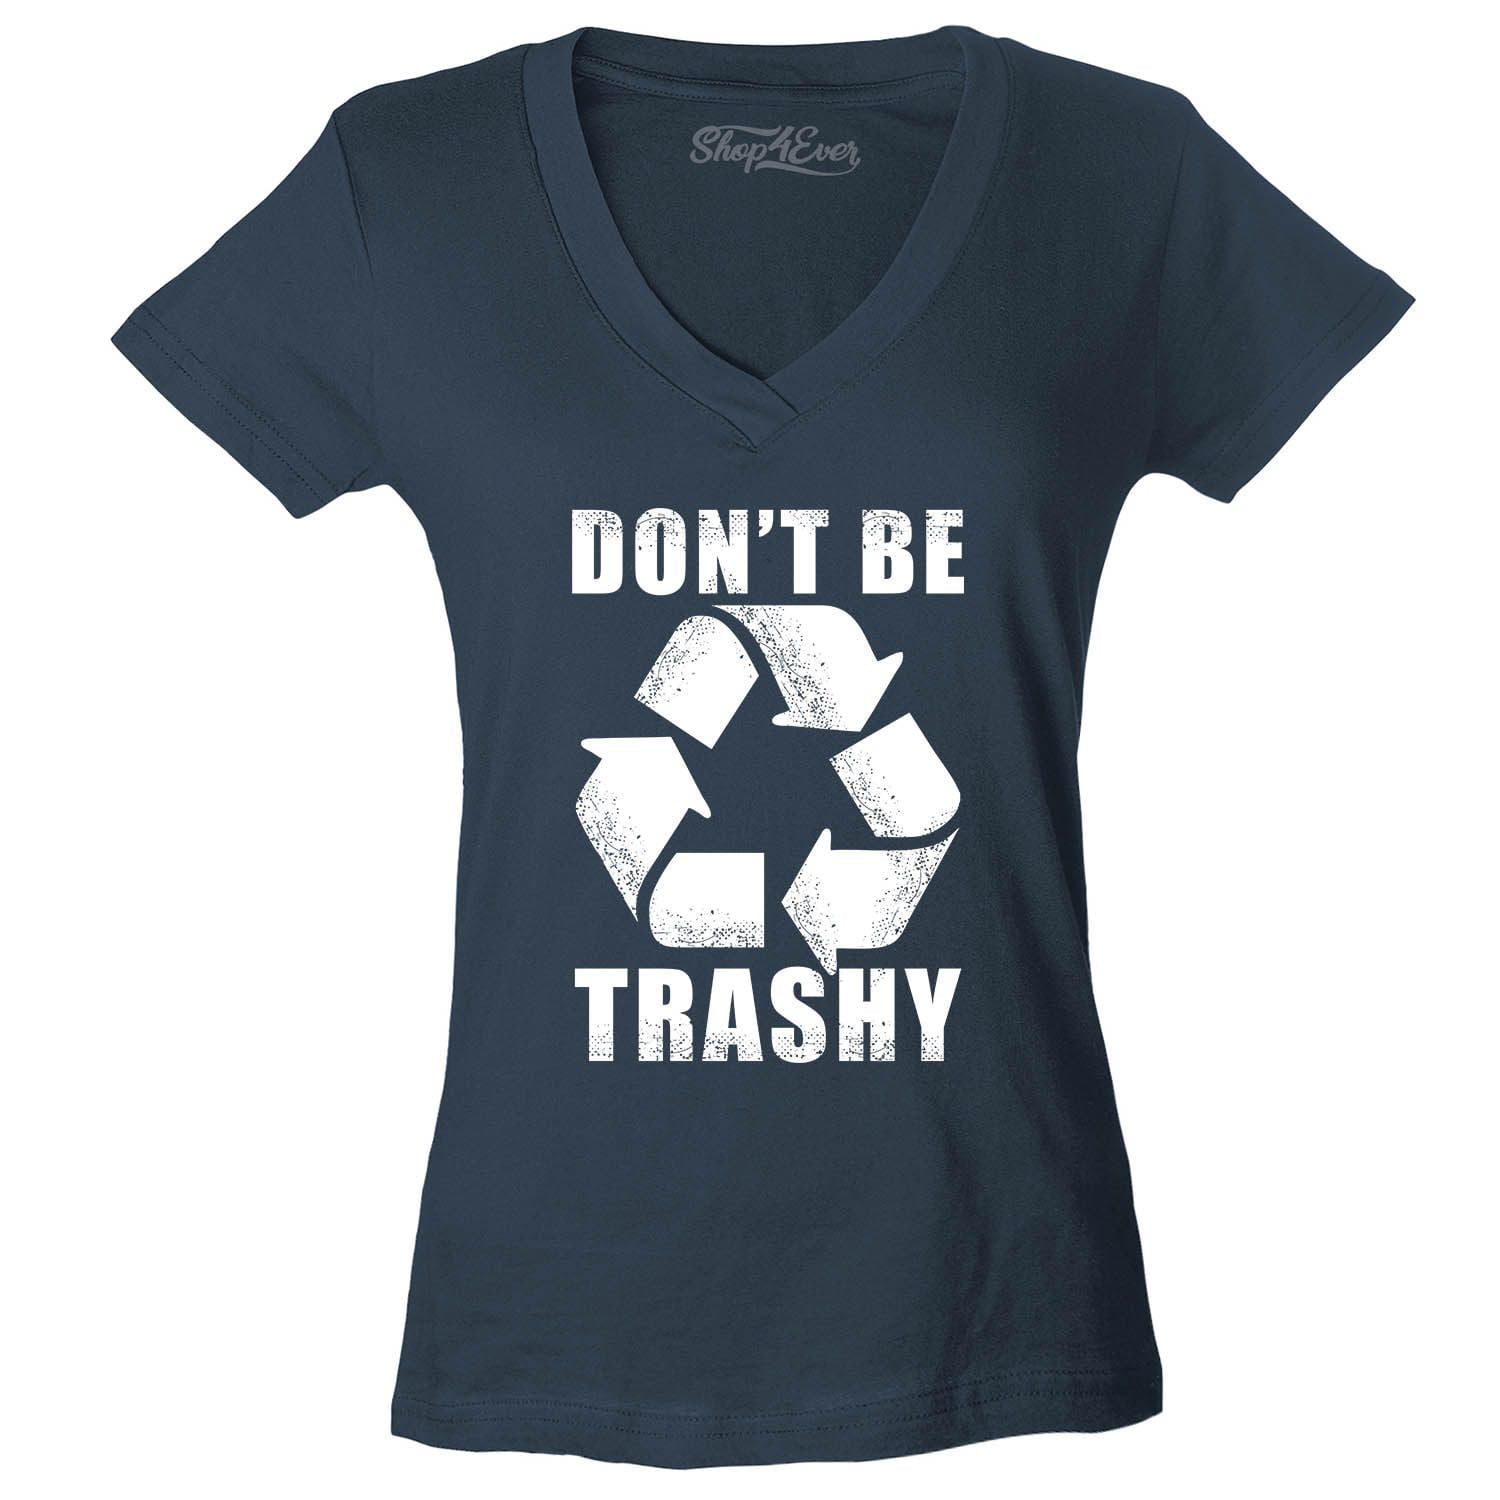 Shop4Ever Women's Don't Be Trashy Slim Fit V-Neck T-Shirt Small ...